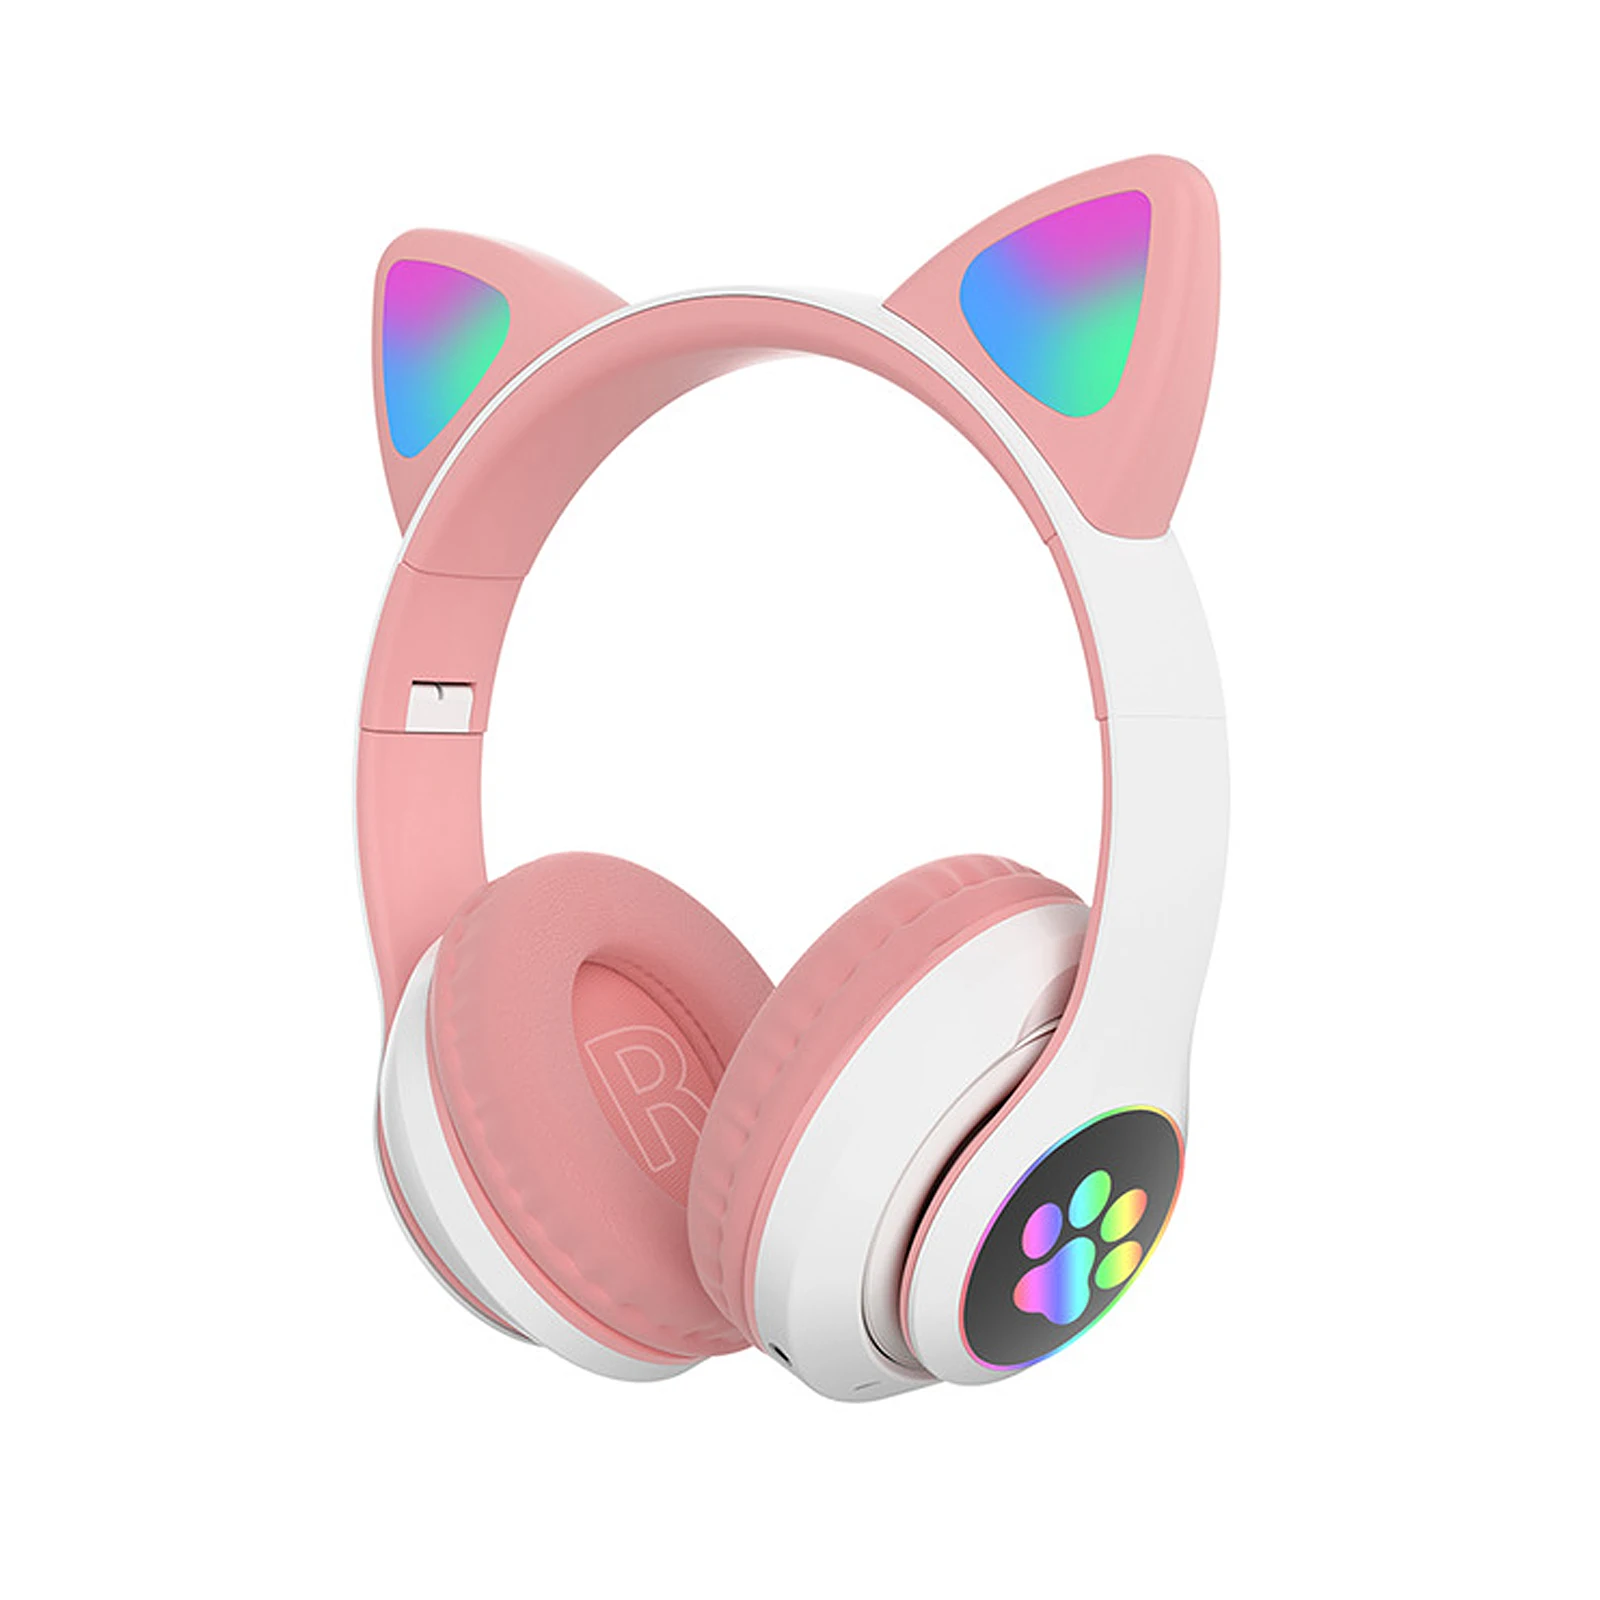 

Stn 28 Cute Pink LED Bt Oreja De Gato Auricular Inalambr Wireless Audifono Cat Claws Ear Headset Headphone Stn-28, As picture showed